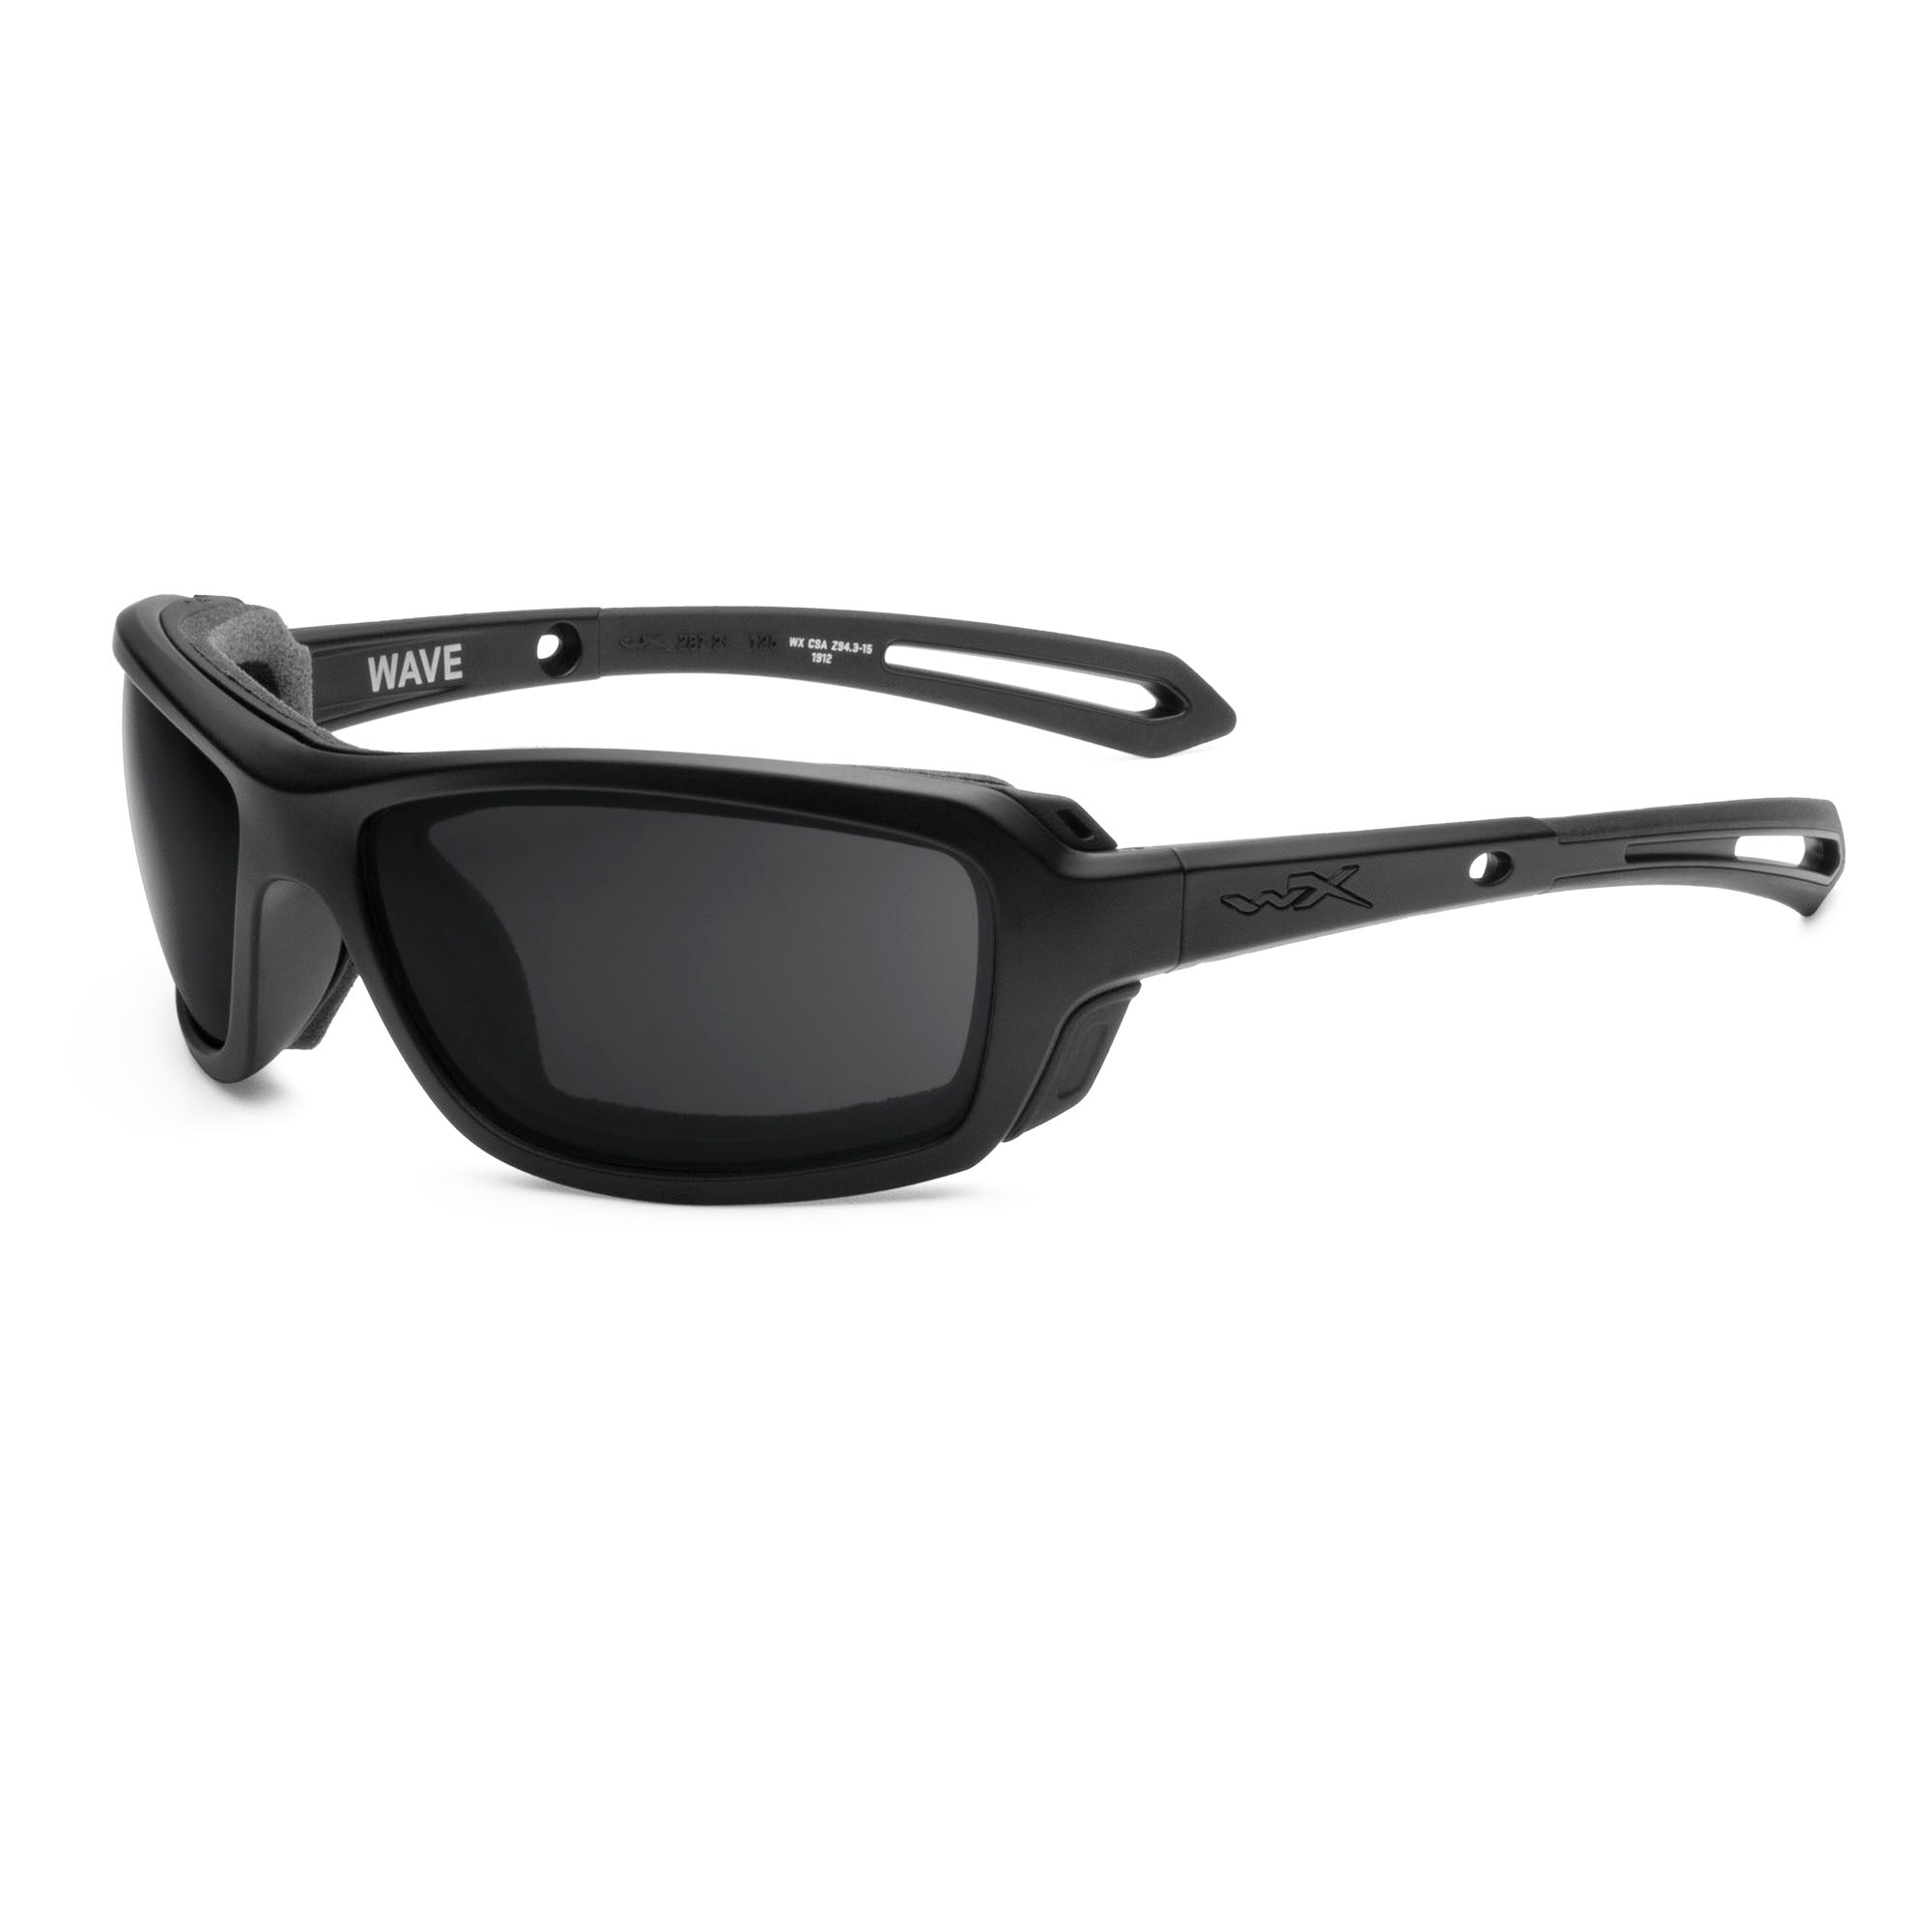 Best Wiley X Sunglasses for Fishing, TOP 5